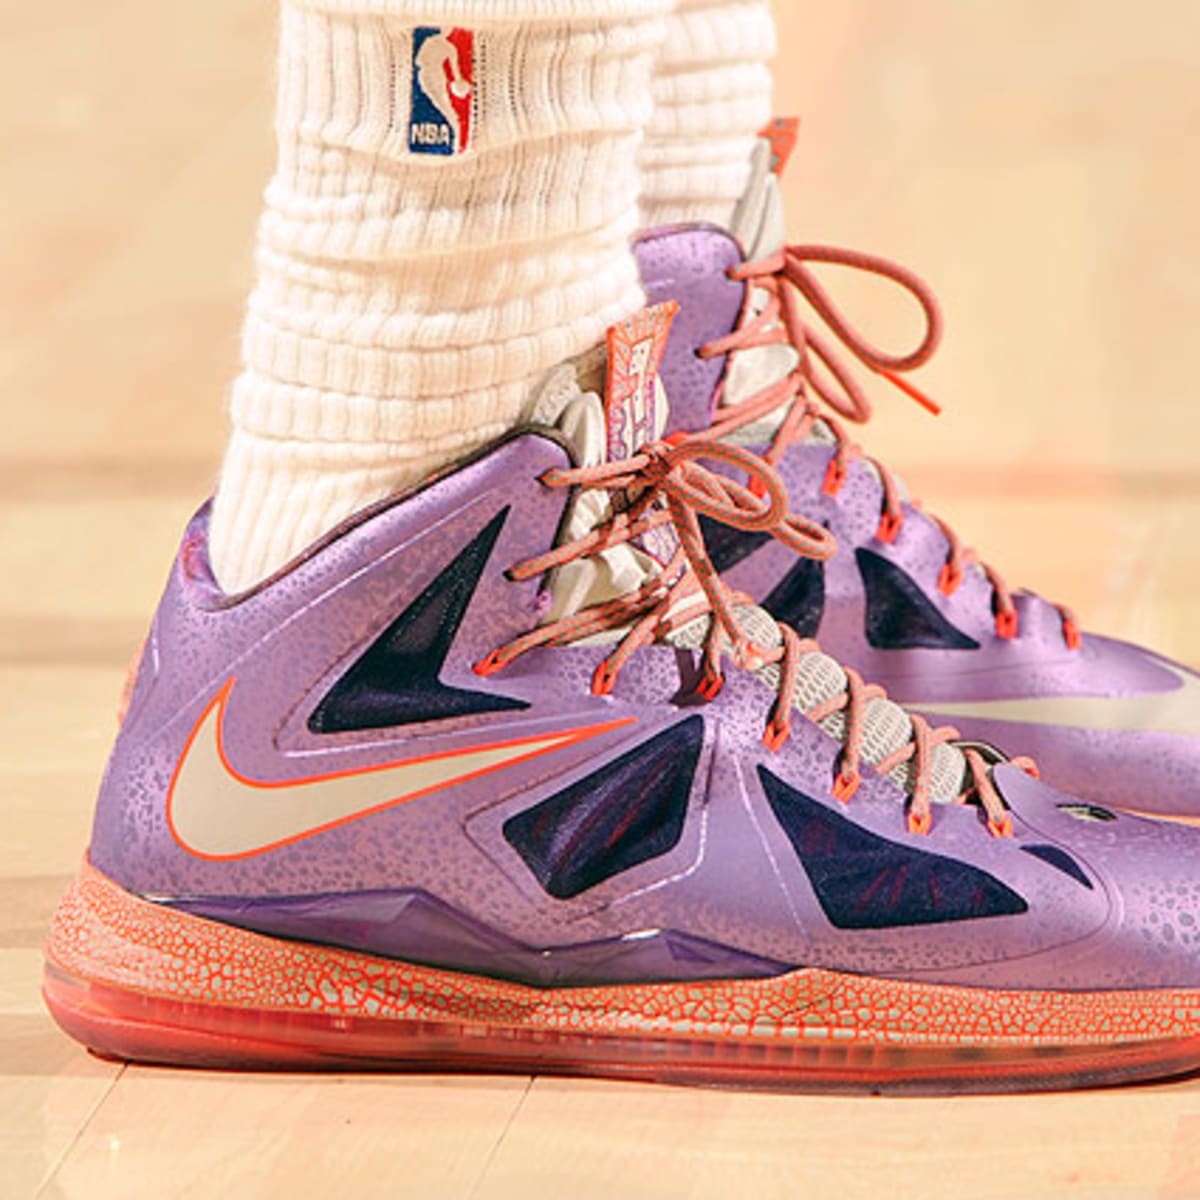 Every All-Star Weekend Sneaker Worn By LeBron James